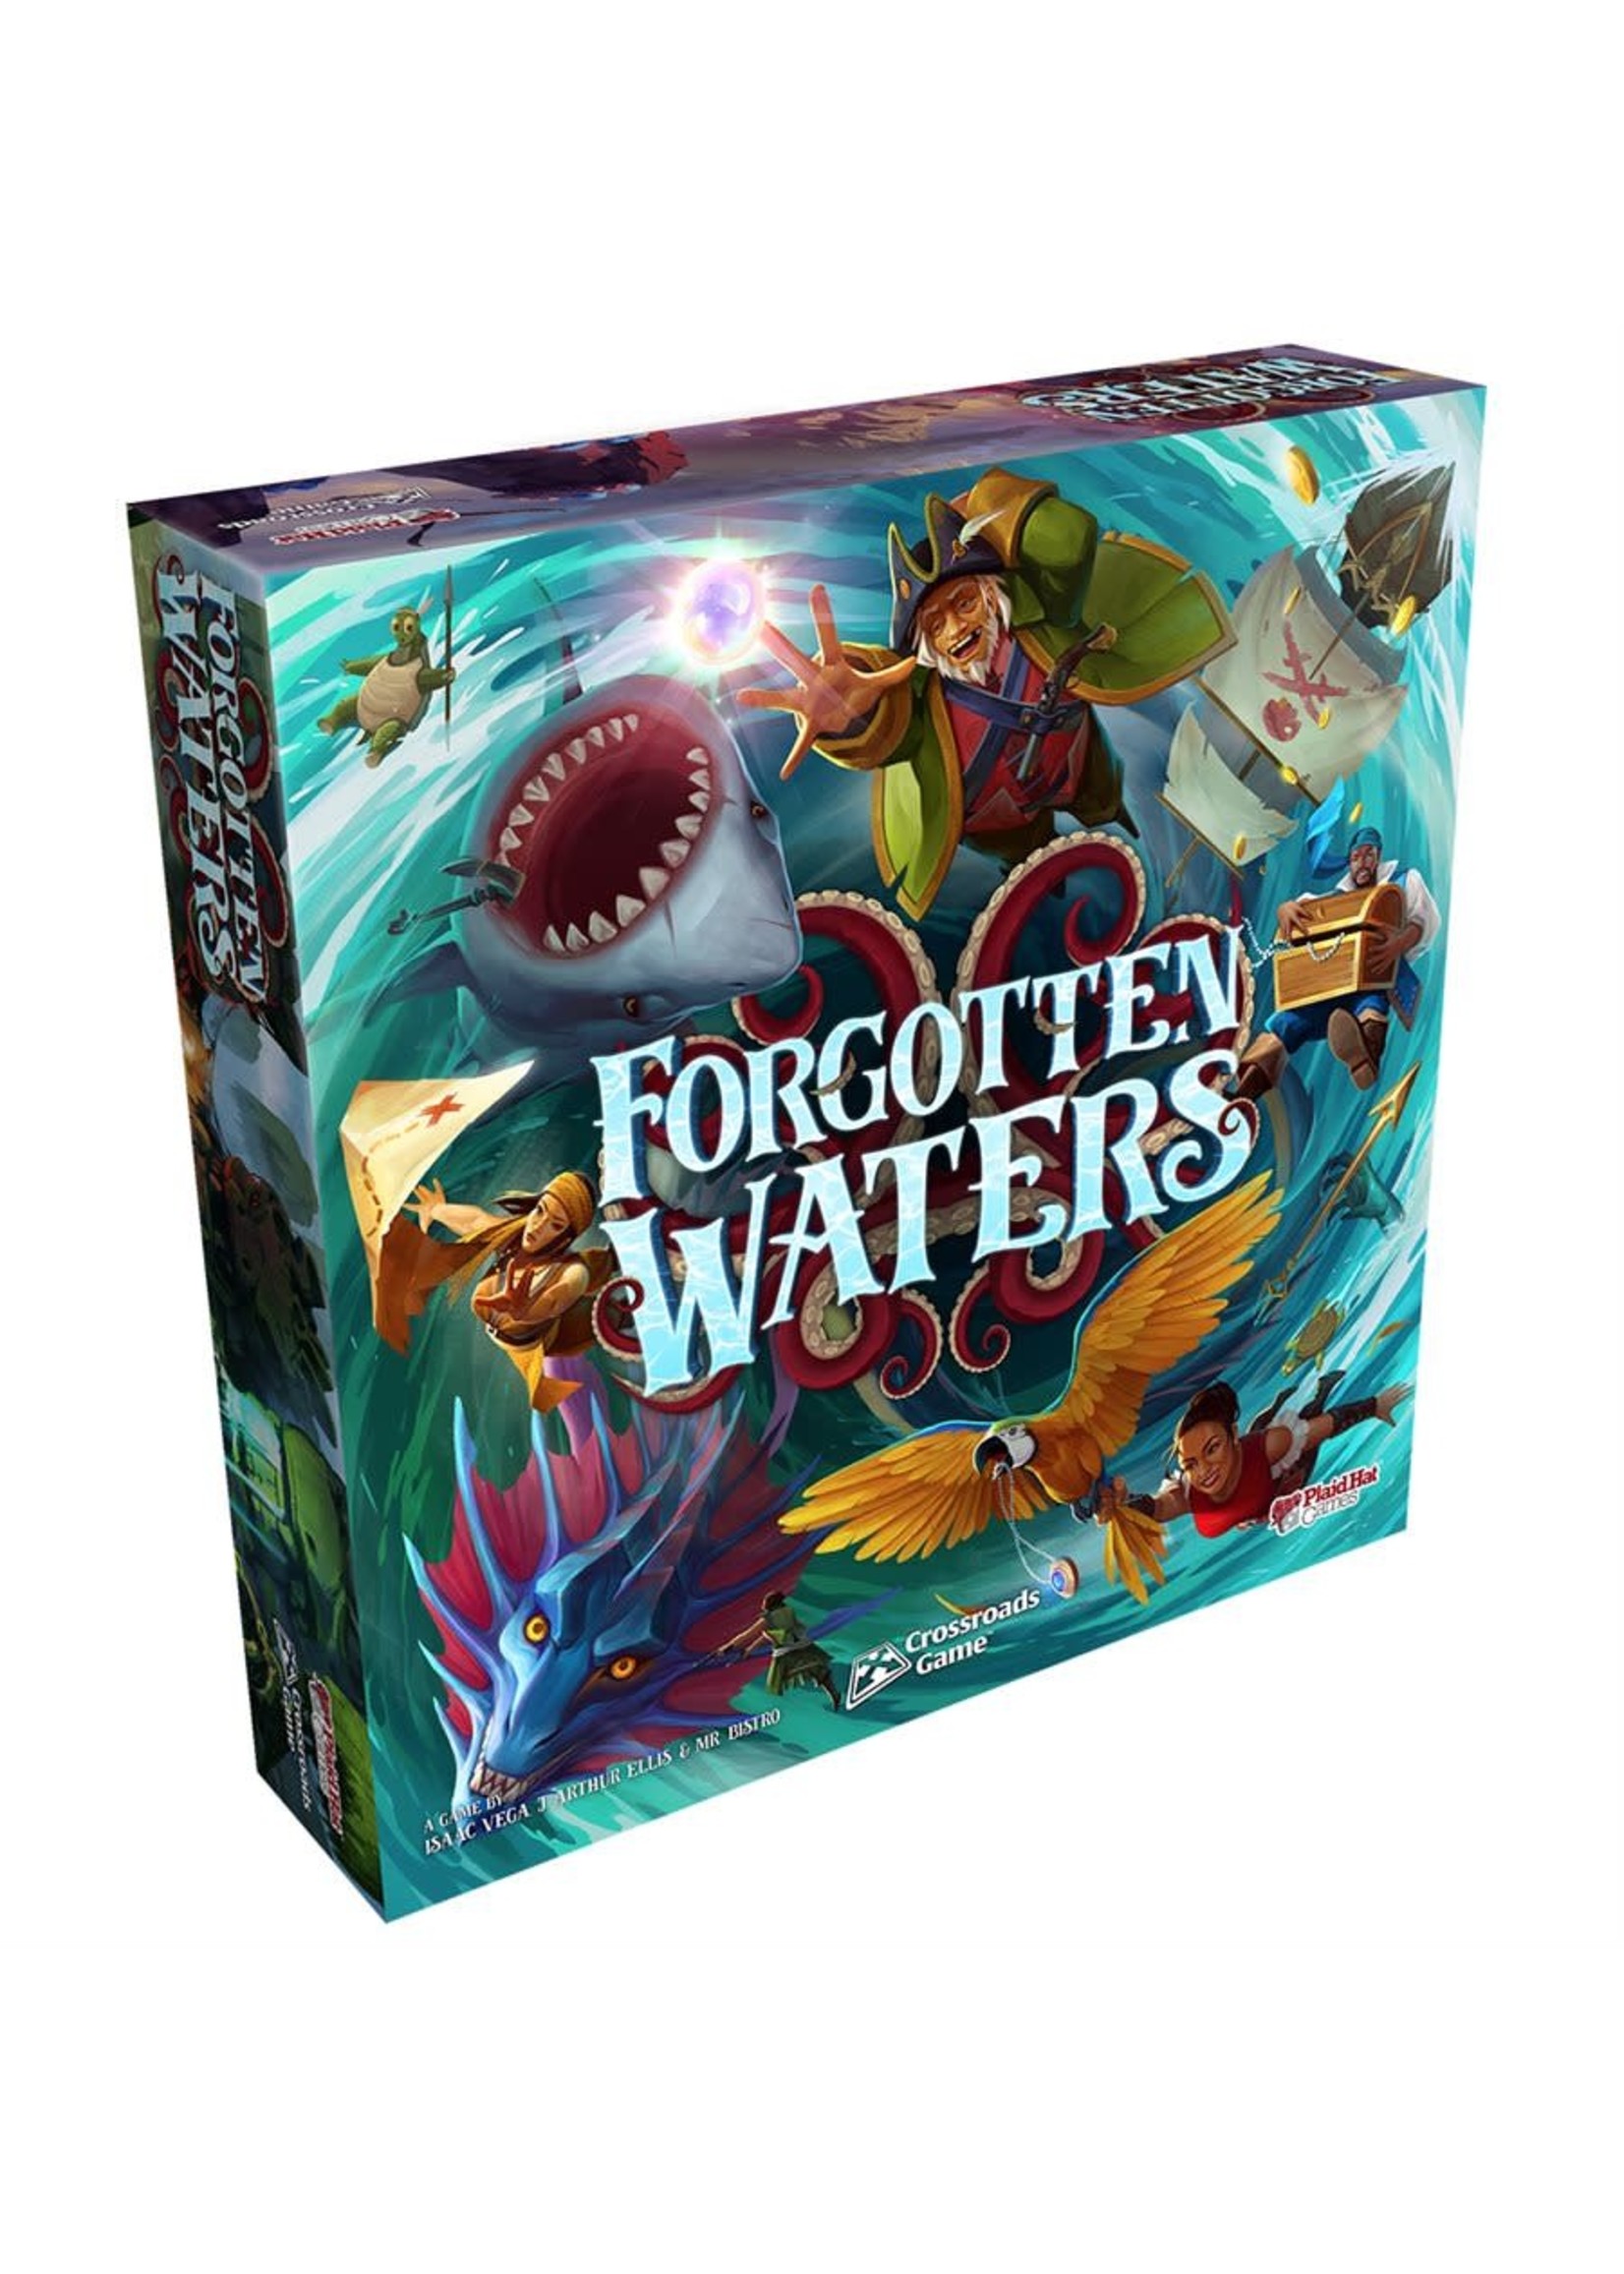 PLAID HAT GAMES FORGOTTEN WATERS (French Edition)